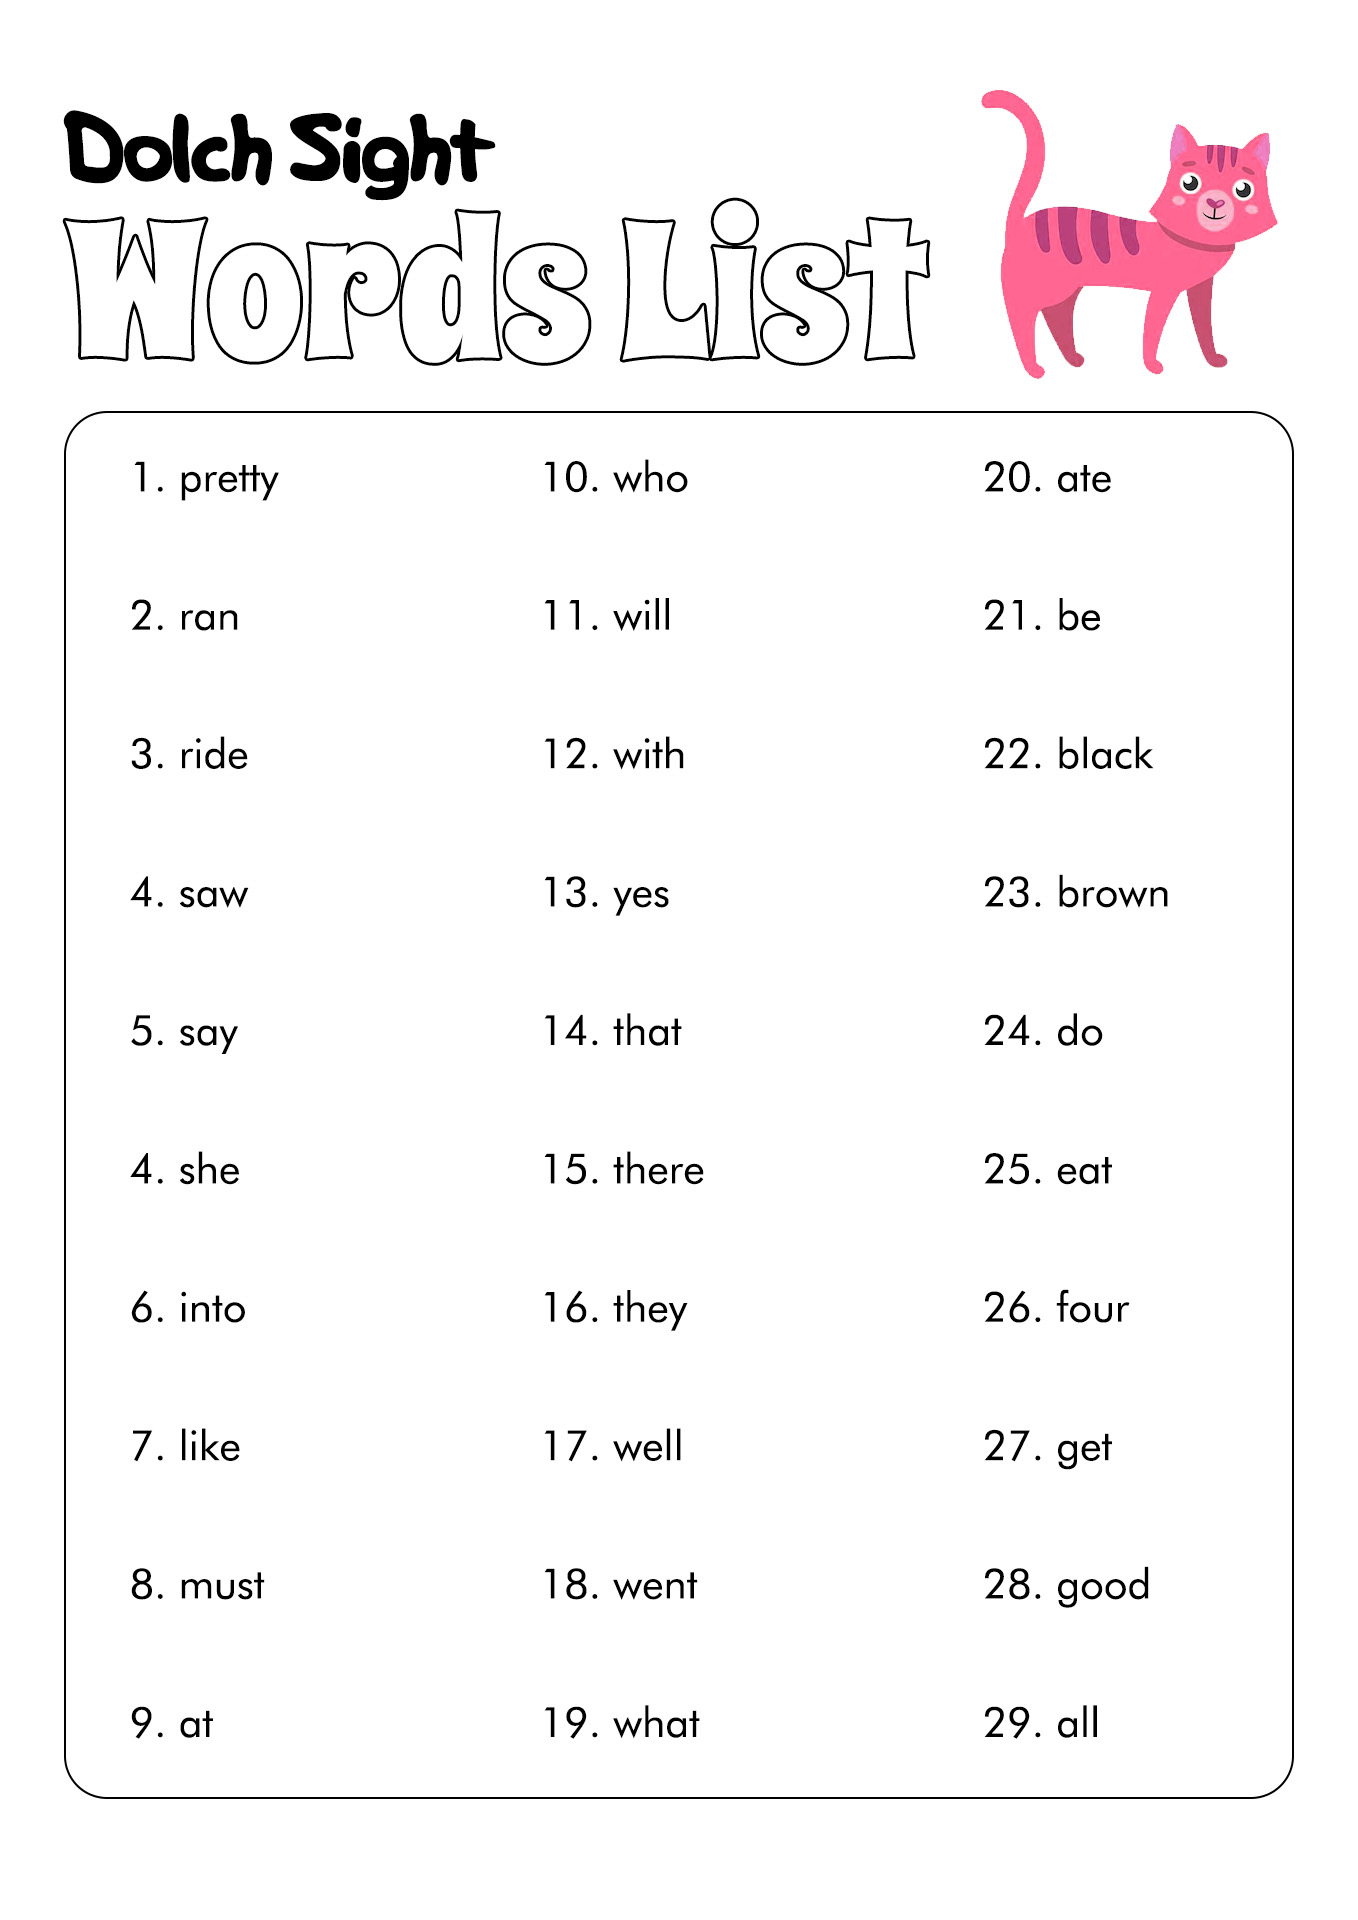 Dolch Sight Word Lists Image